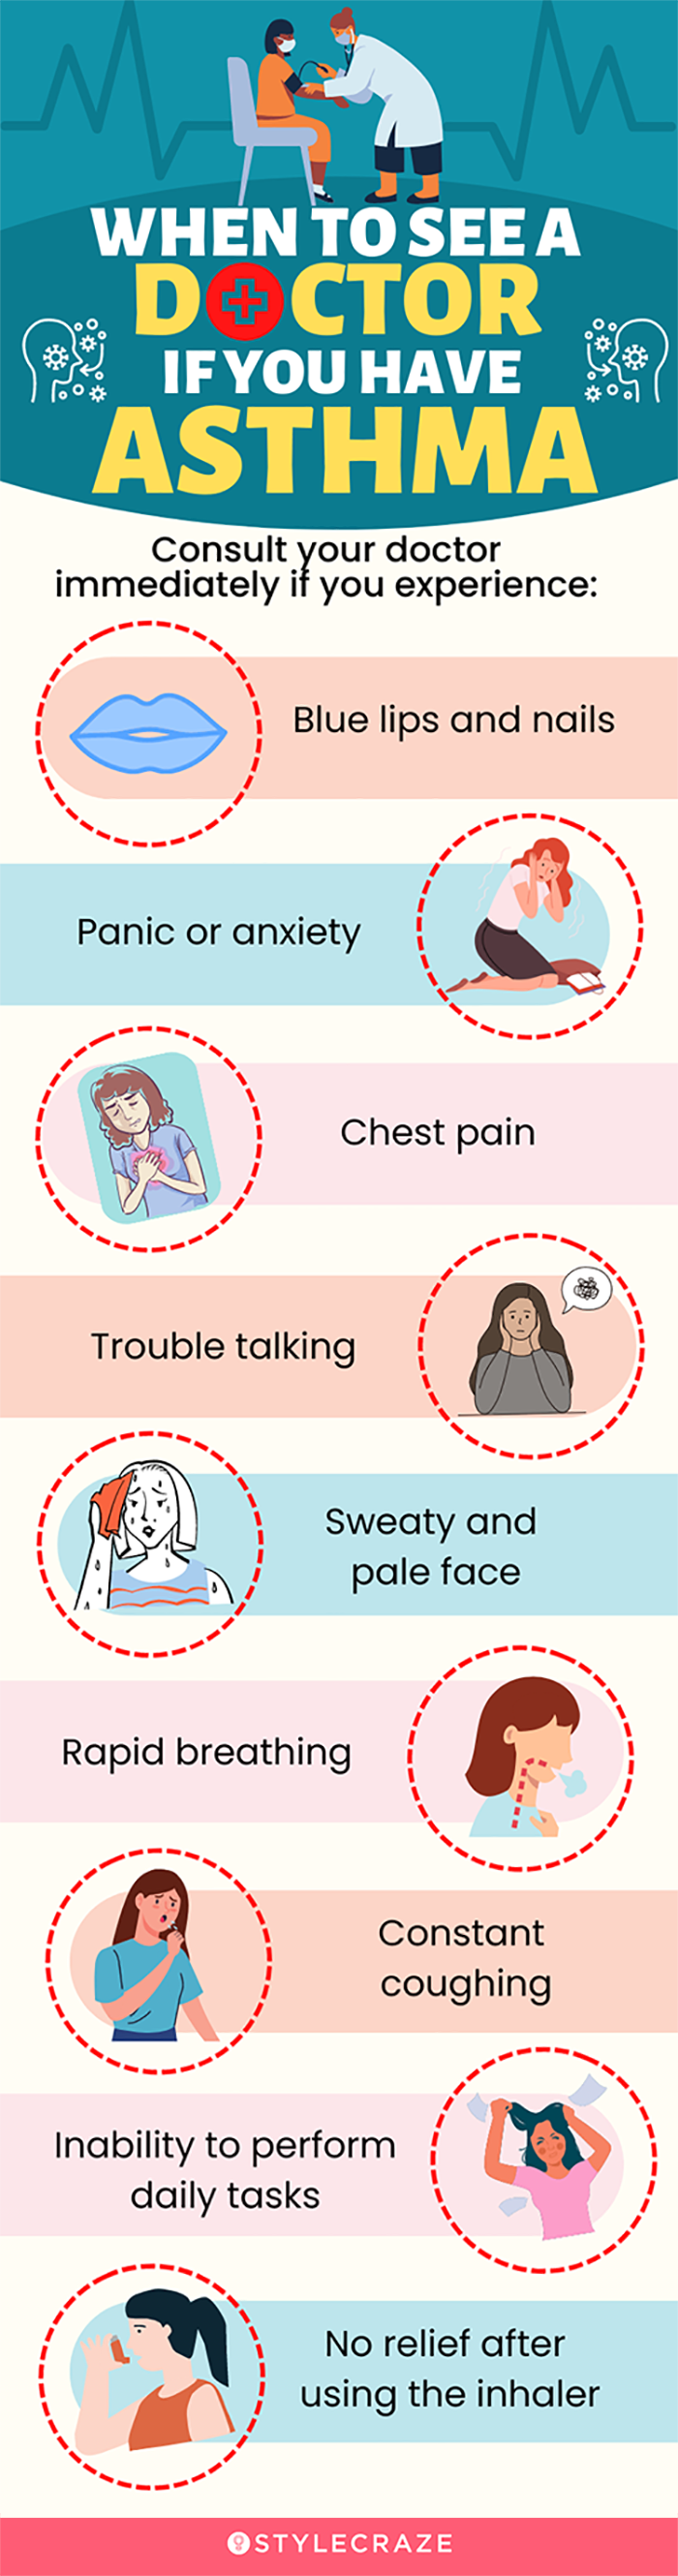 when to see a doctor if you have asthma (infographic)